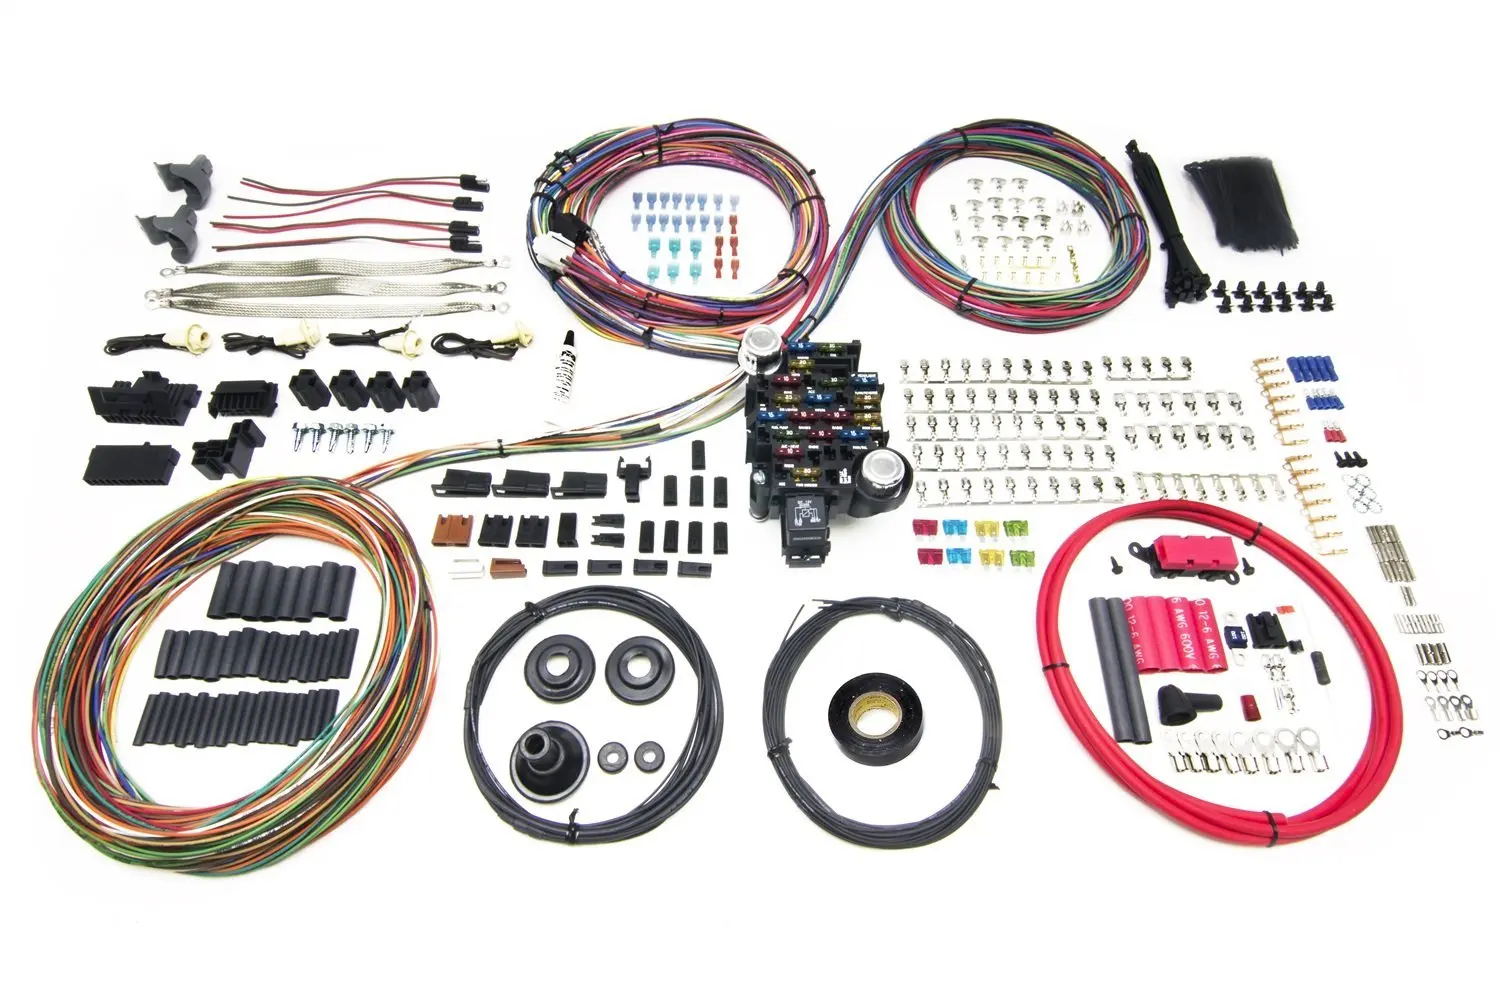 Cheap Chassis Wiring, find Chassis Wiring deals on line at Alibaba.com